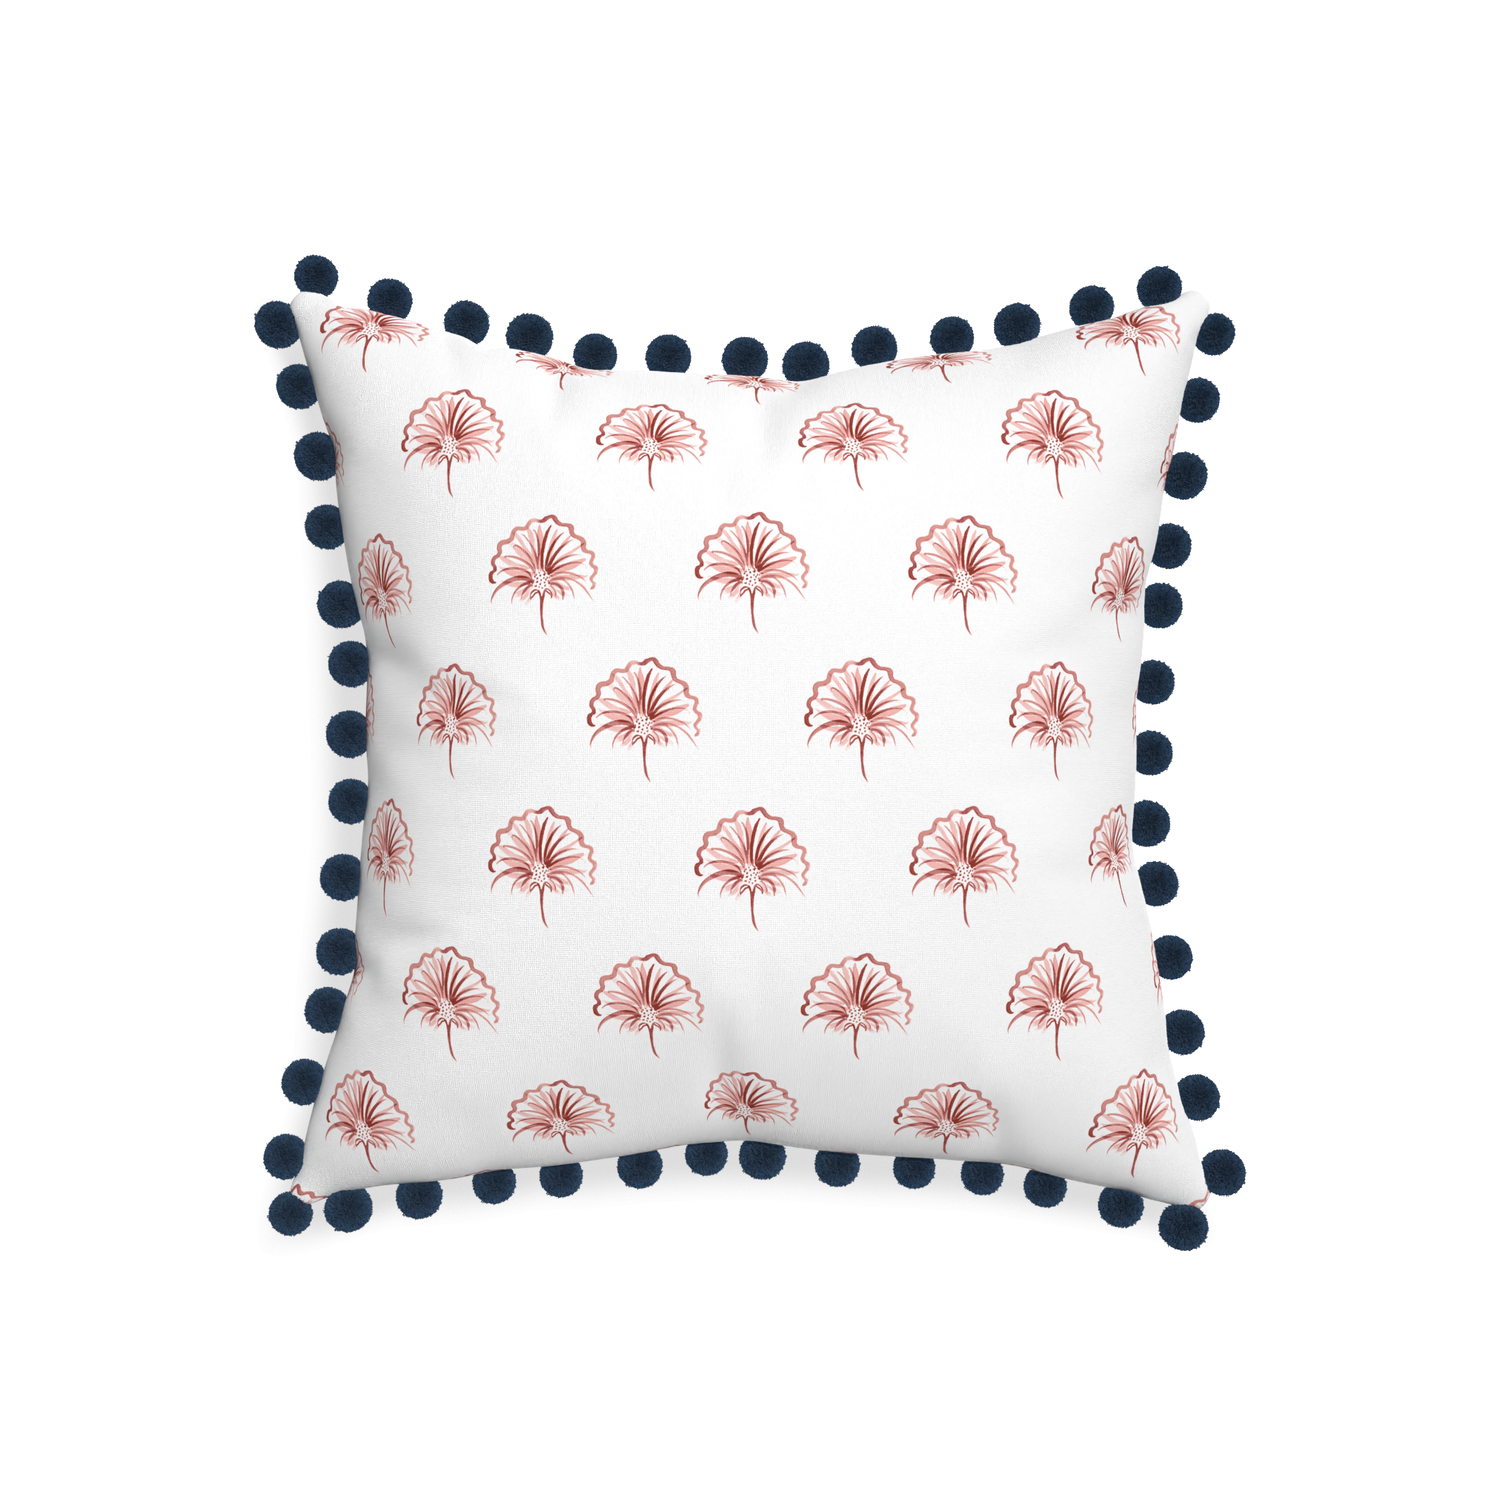 20-square penelope rose custom floral pinkpillow with c on white background